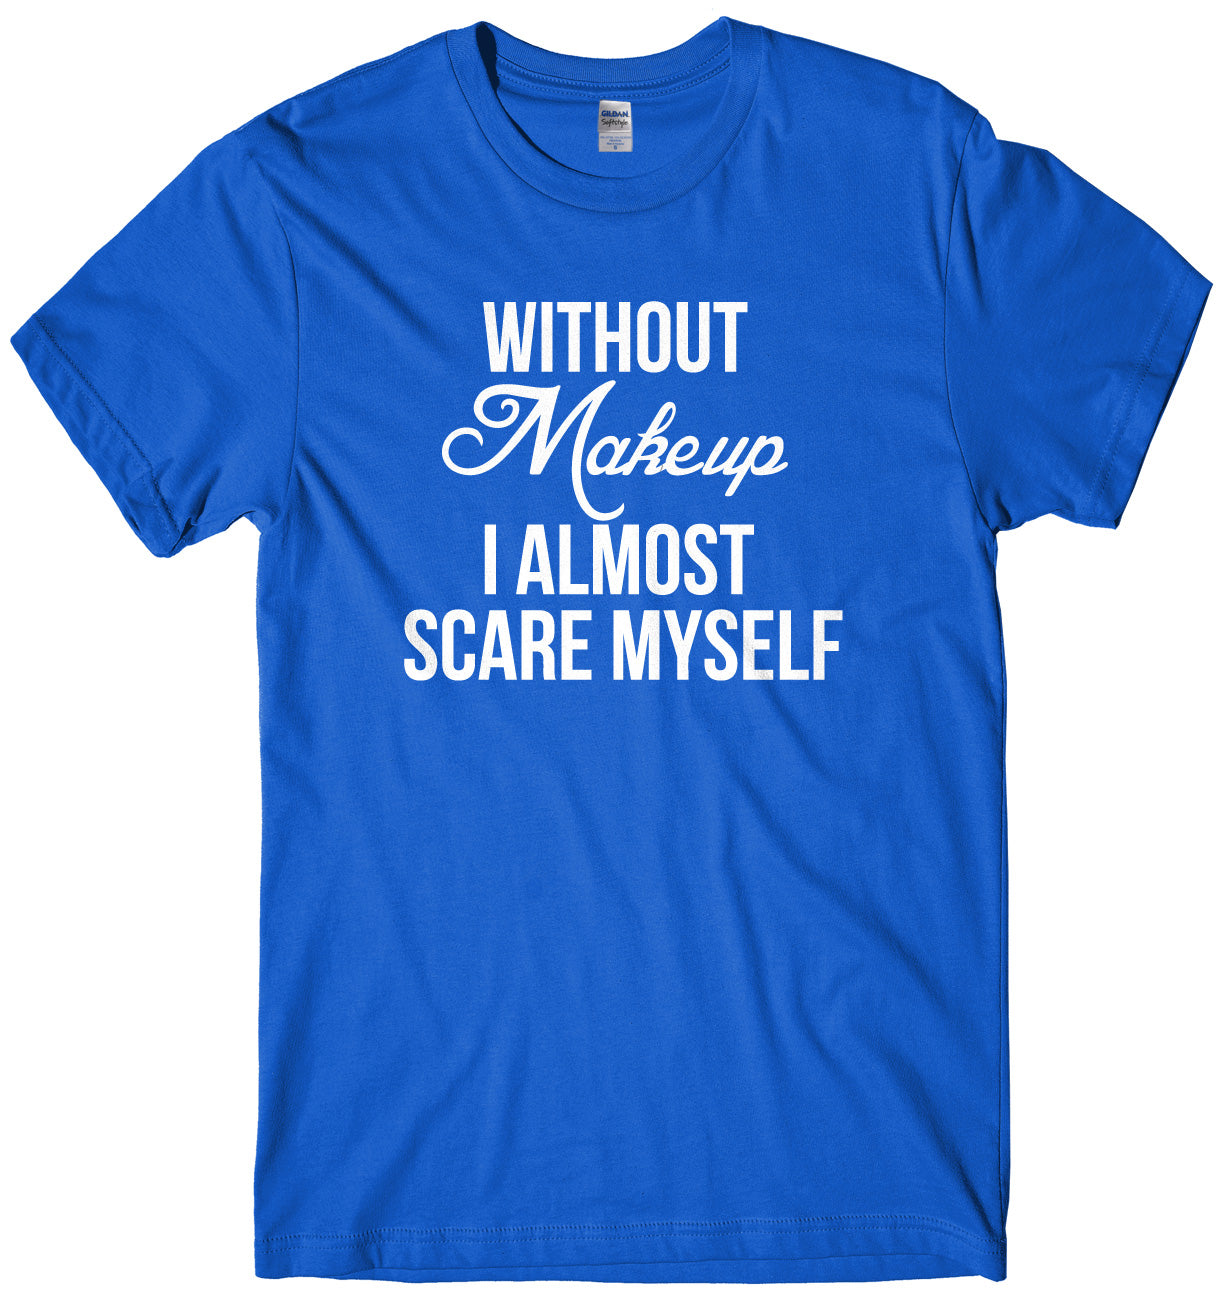 Without Makeup I Almost Scare Myself Mens Unisex Halloween T-Shirt